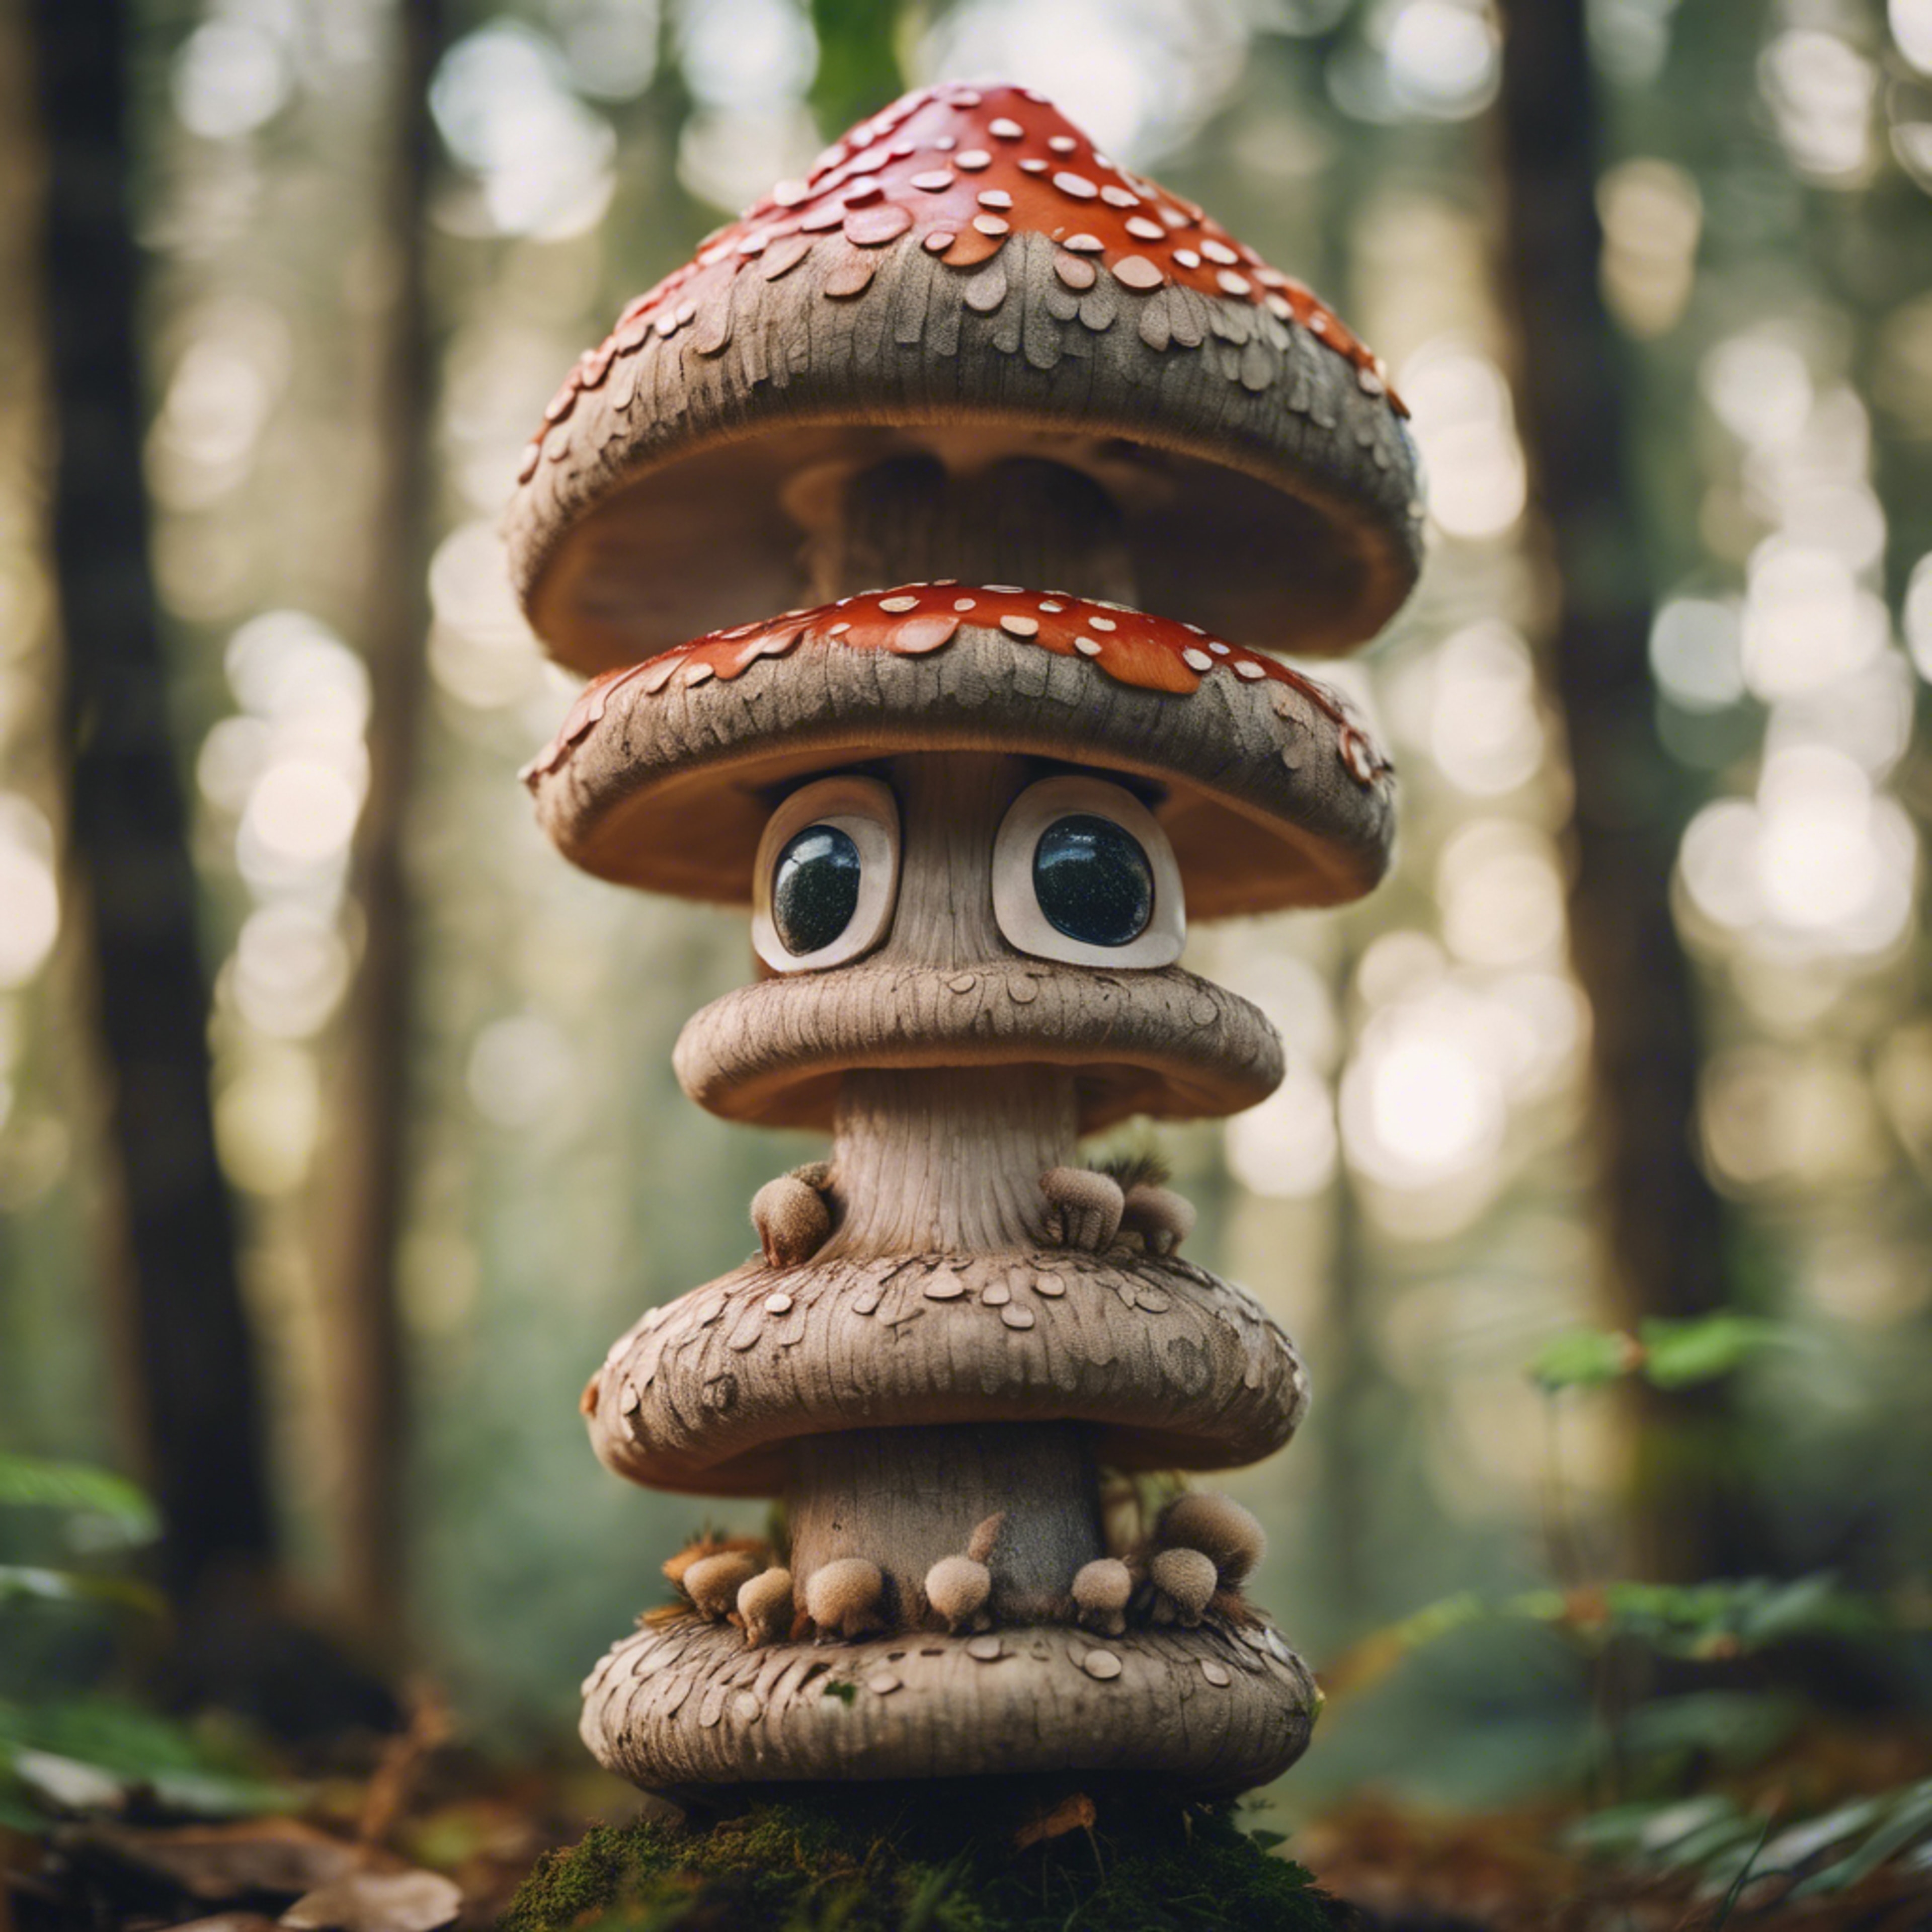 A couple of cute Mushrooms playfully stacking up to form a totem pole in a whimsical forest. Tapeta[433a45e1c3f24476b32f]